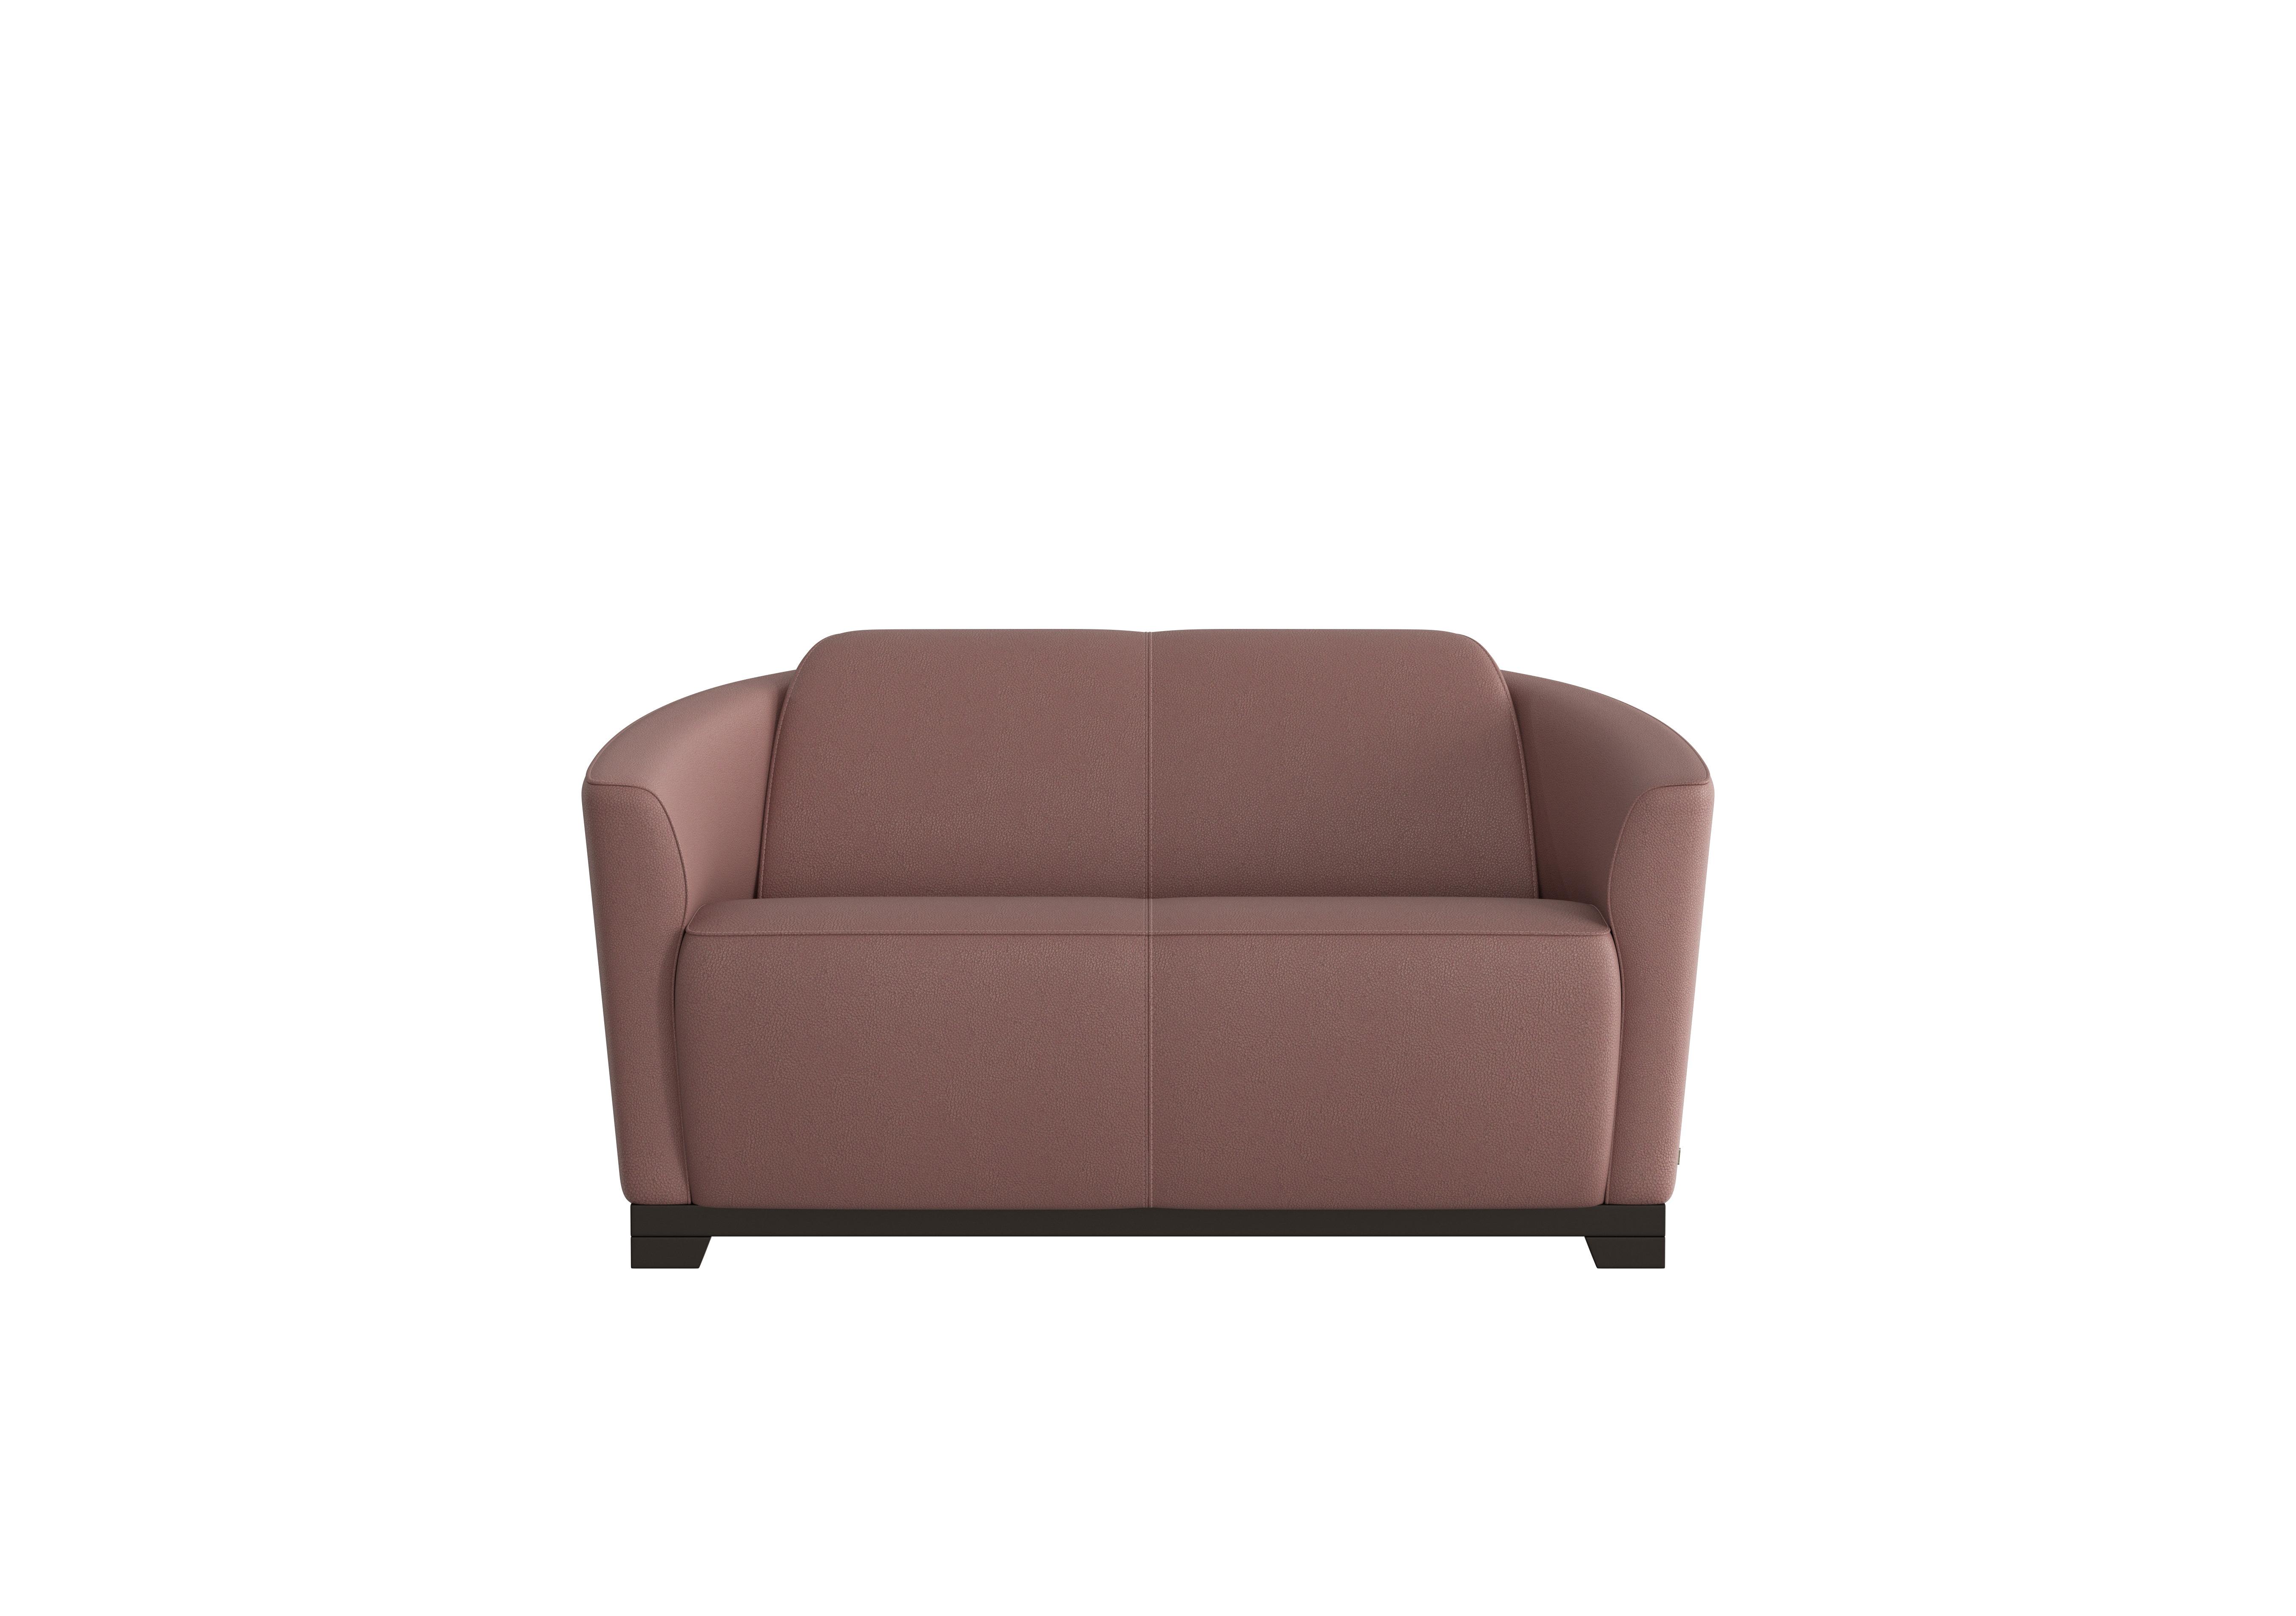 Ketty 2 Seater Leather Sofa in Botero Cipria 2160 on Furniture Village